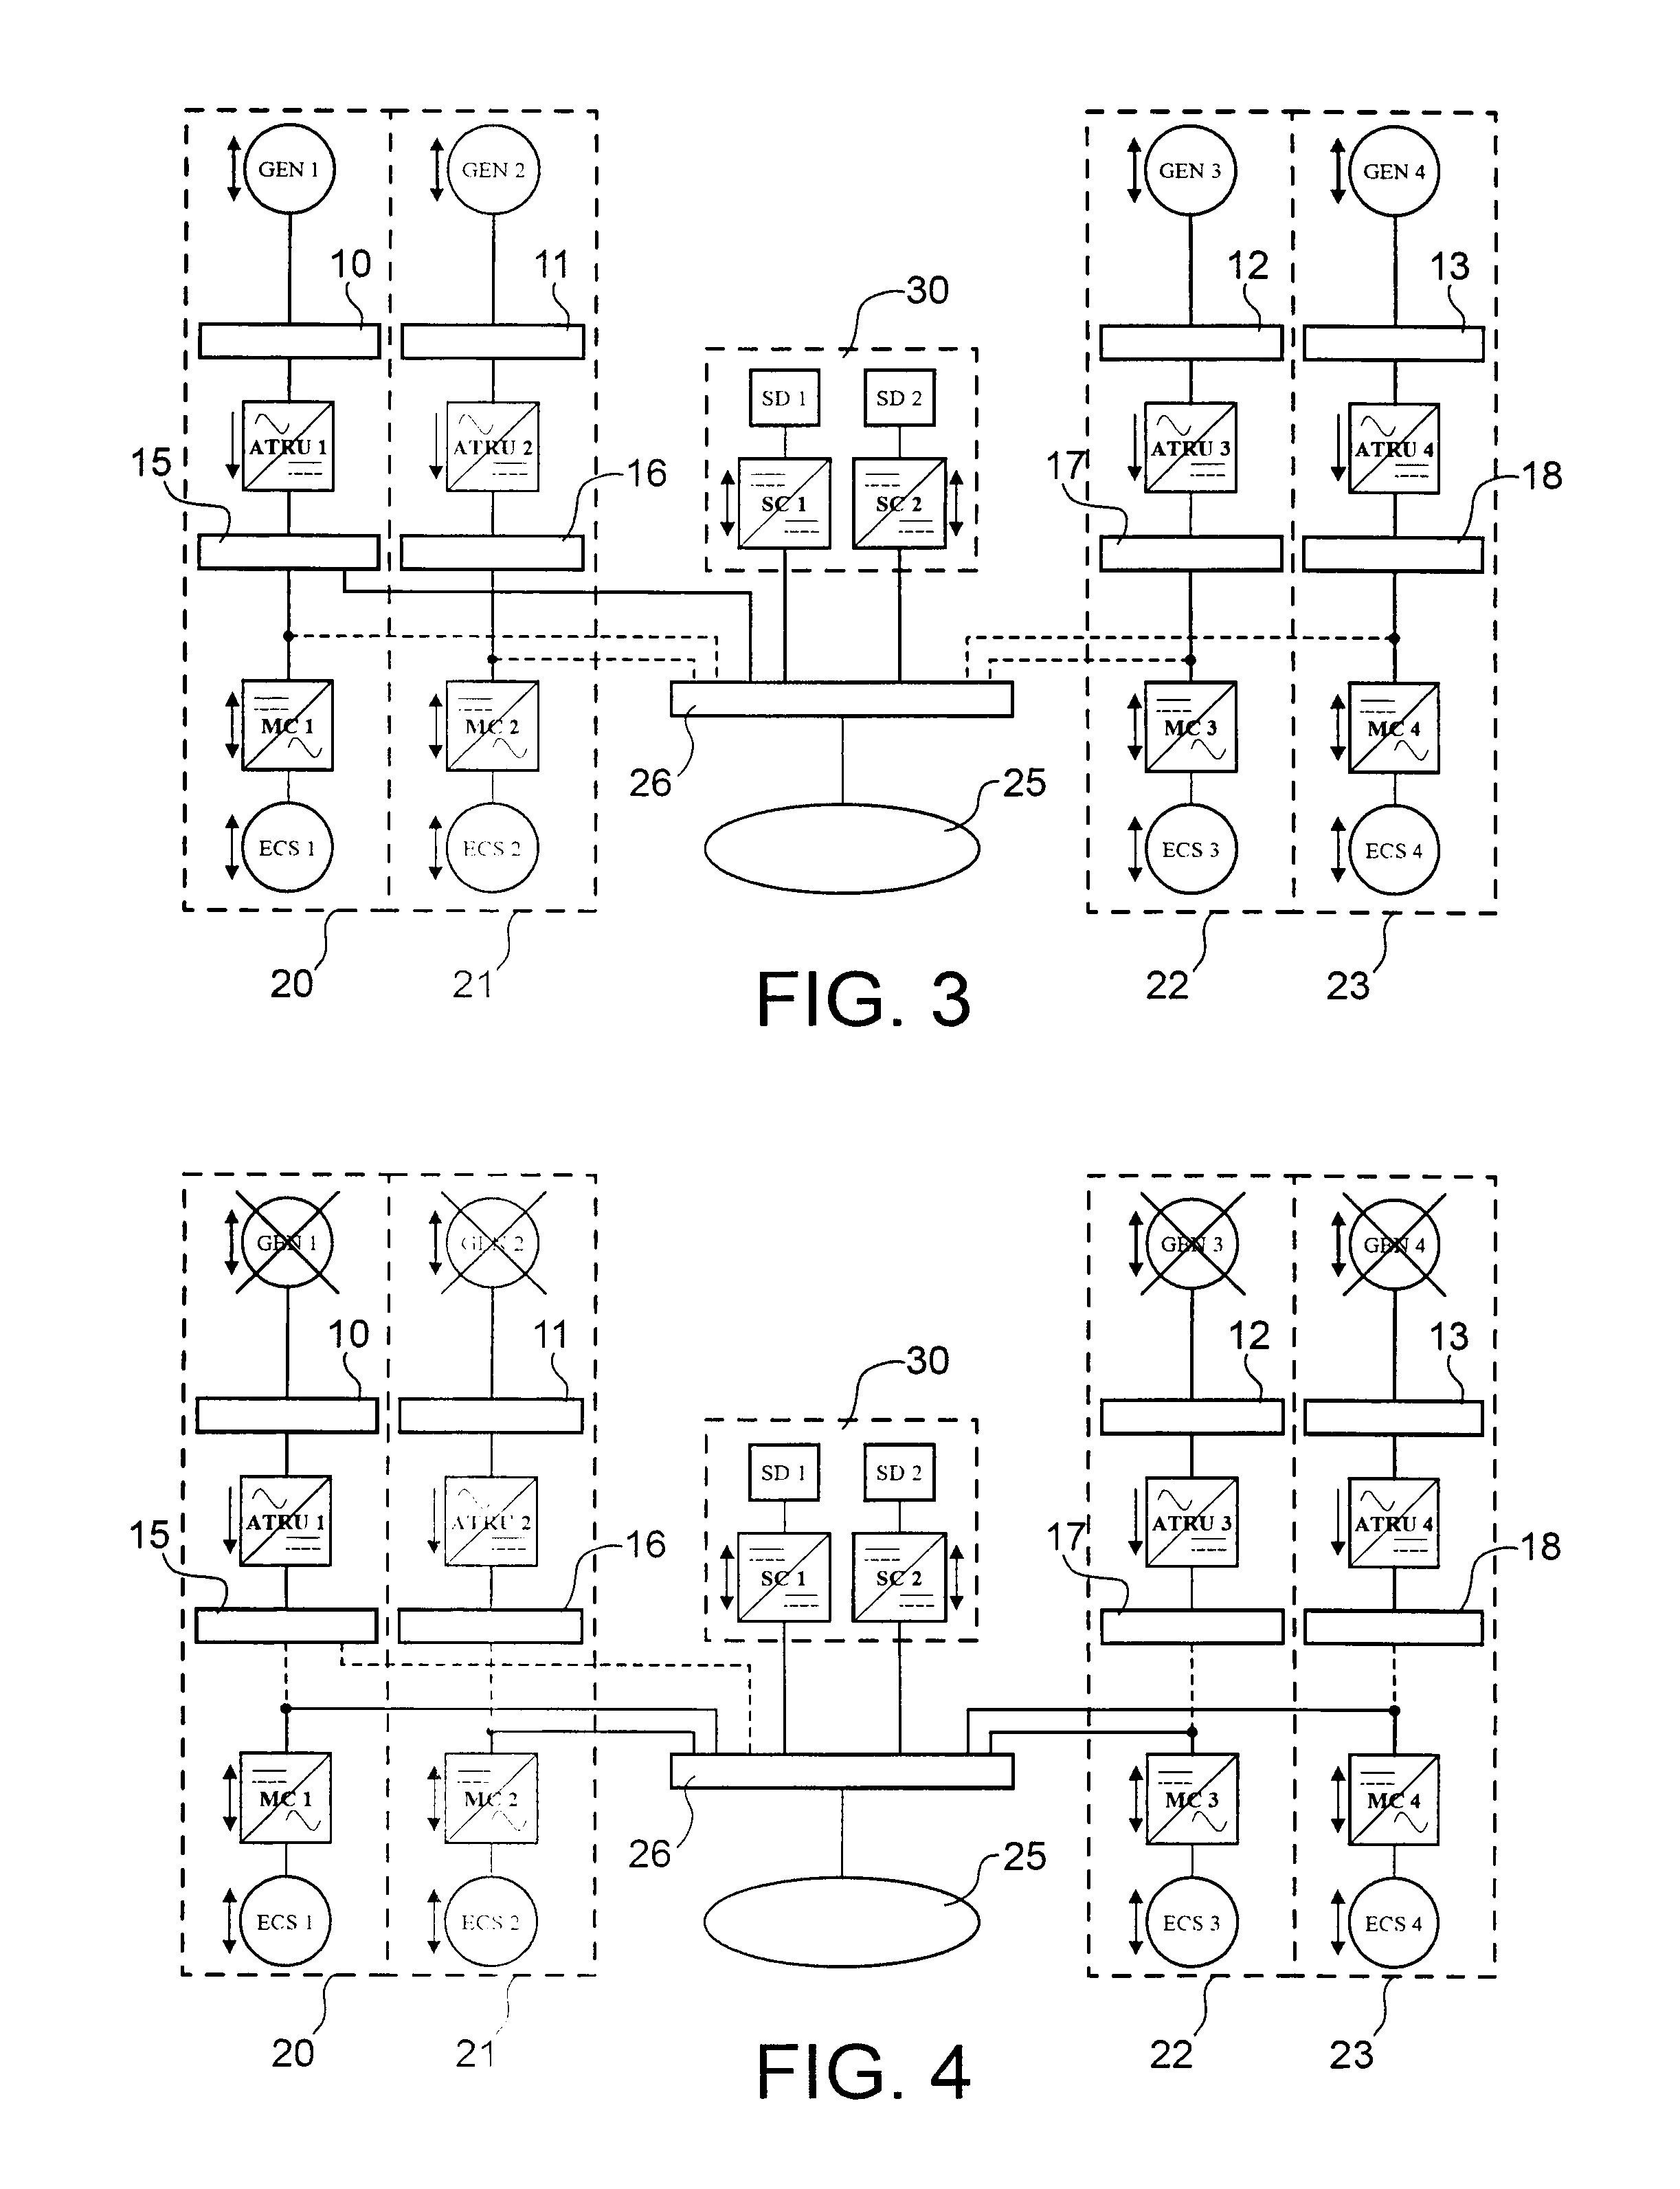 Device and method for generating a back-up electricity supply on board an aircraft